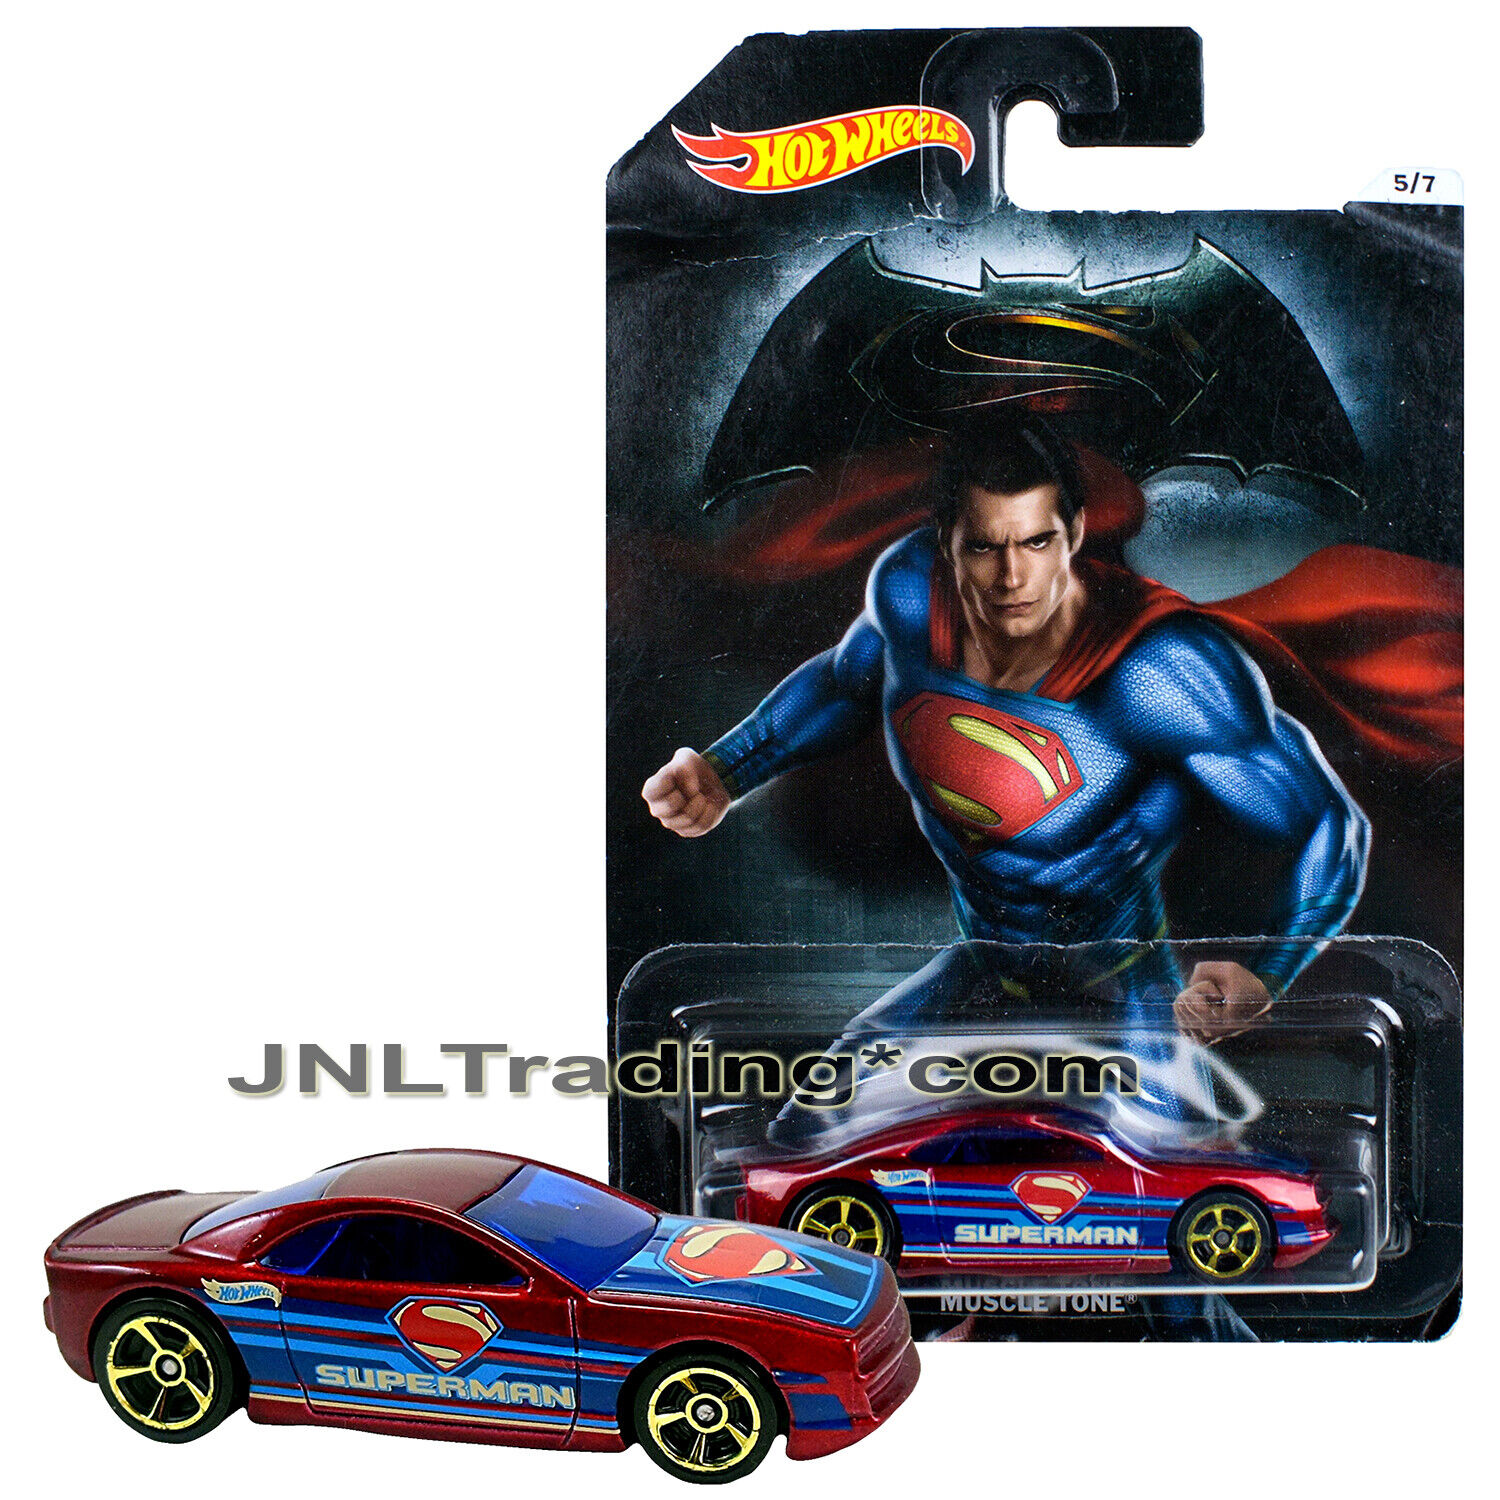 Year 2015 Hot Wheels Dawn of Justice 1:64 Die Cast Car 5/7 SUPERMAN MUSCLE TONE